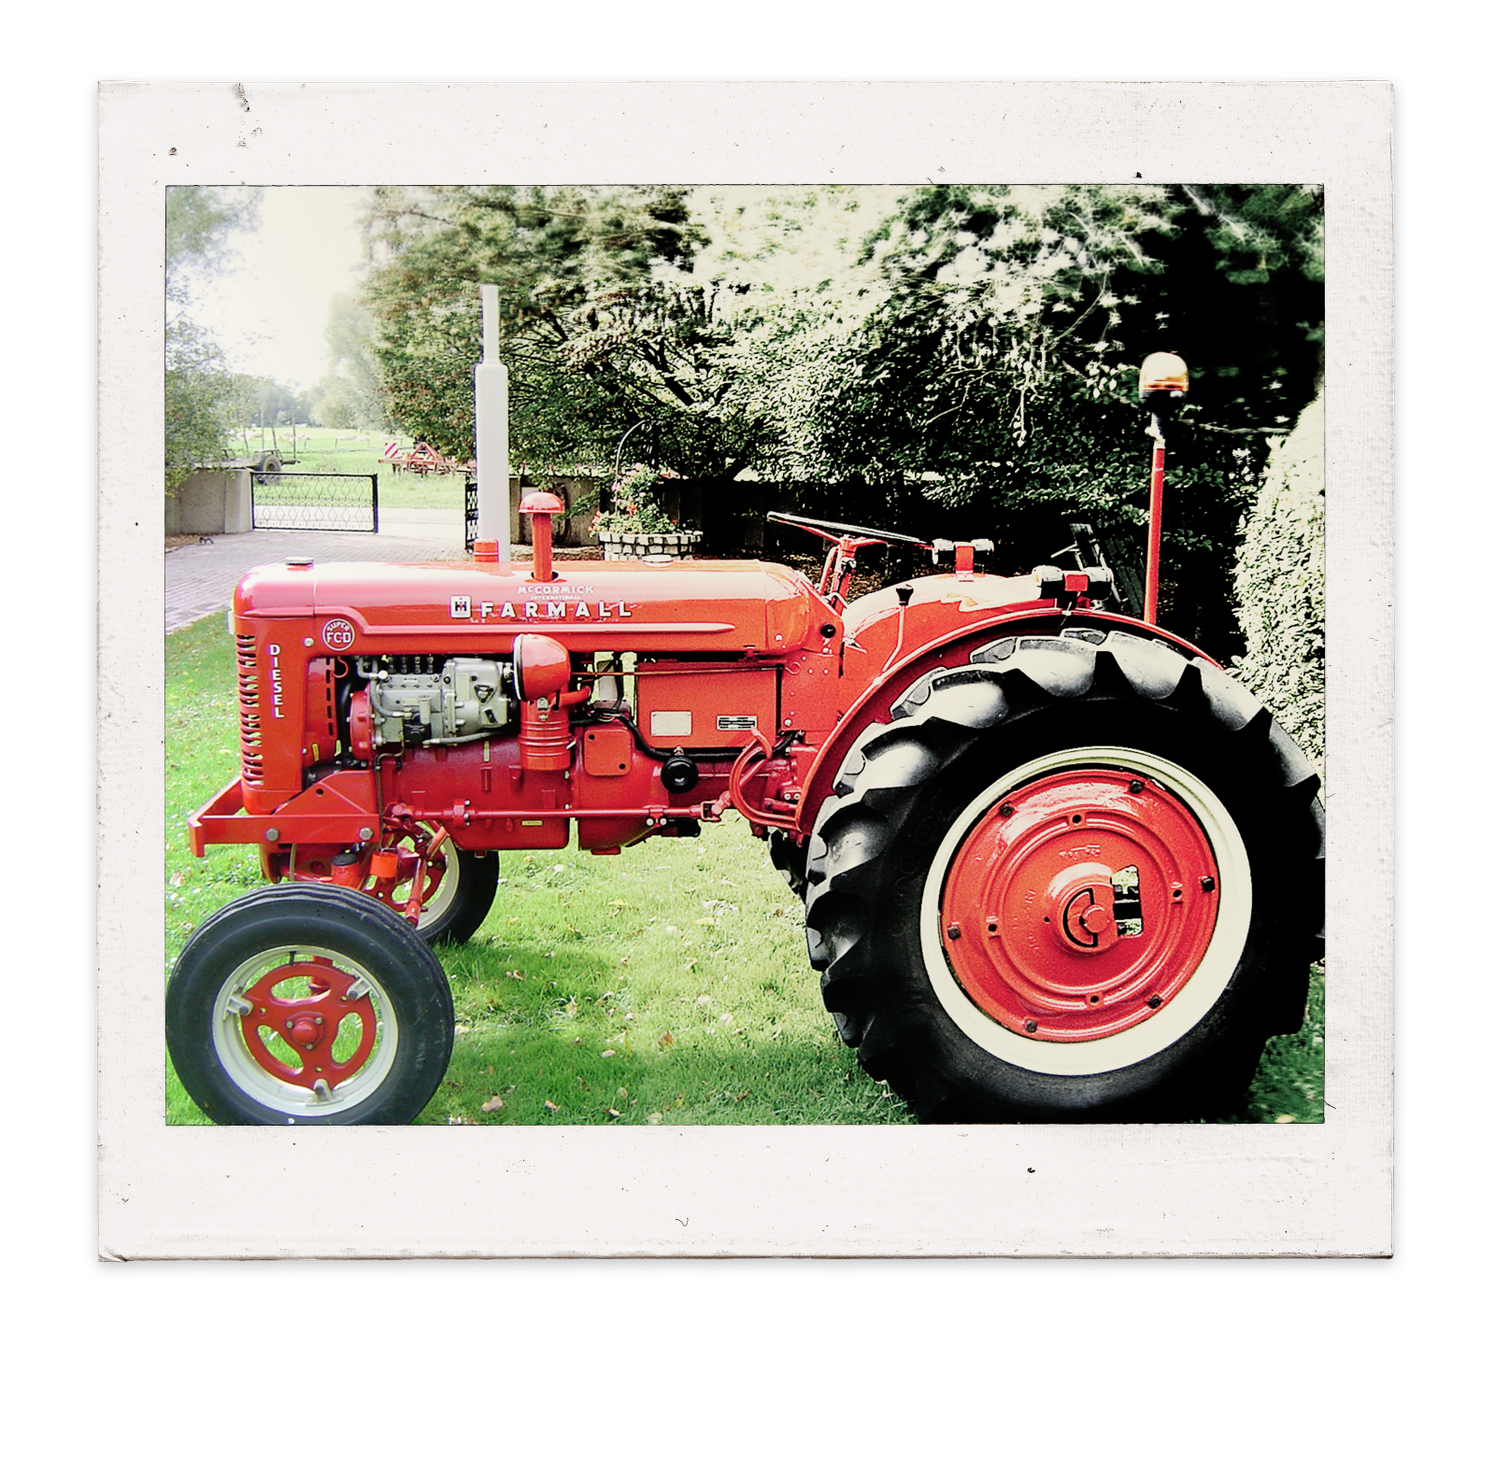 France Farmall tractor sideview treated